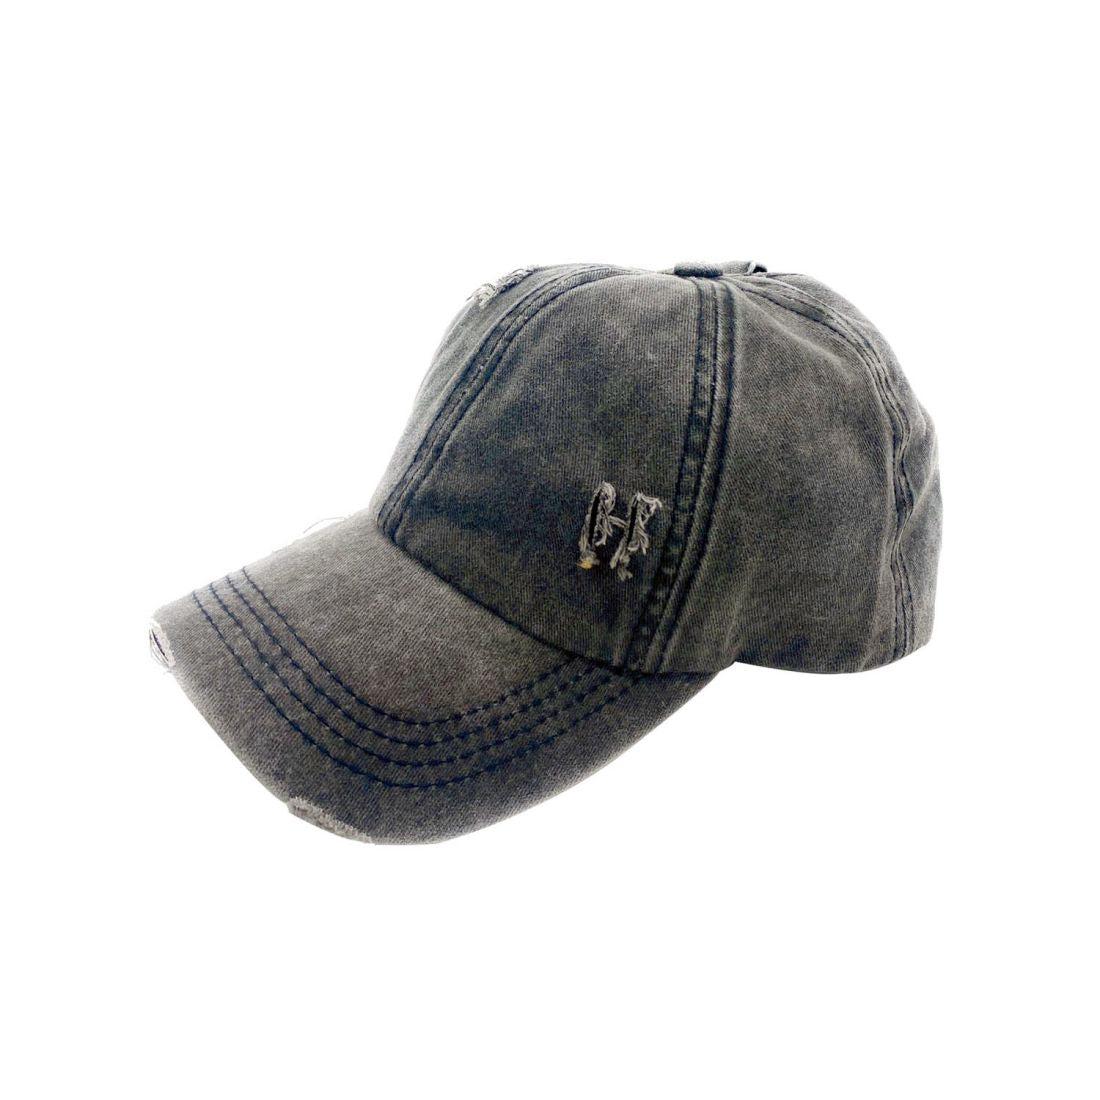 Empire Cove Womens Distressed Washed Ponytail Caps Hats Vintage Relaxed Fit-Campus-Wardrobe